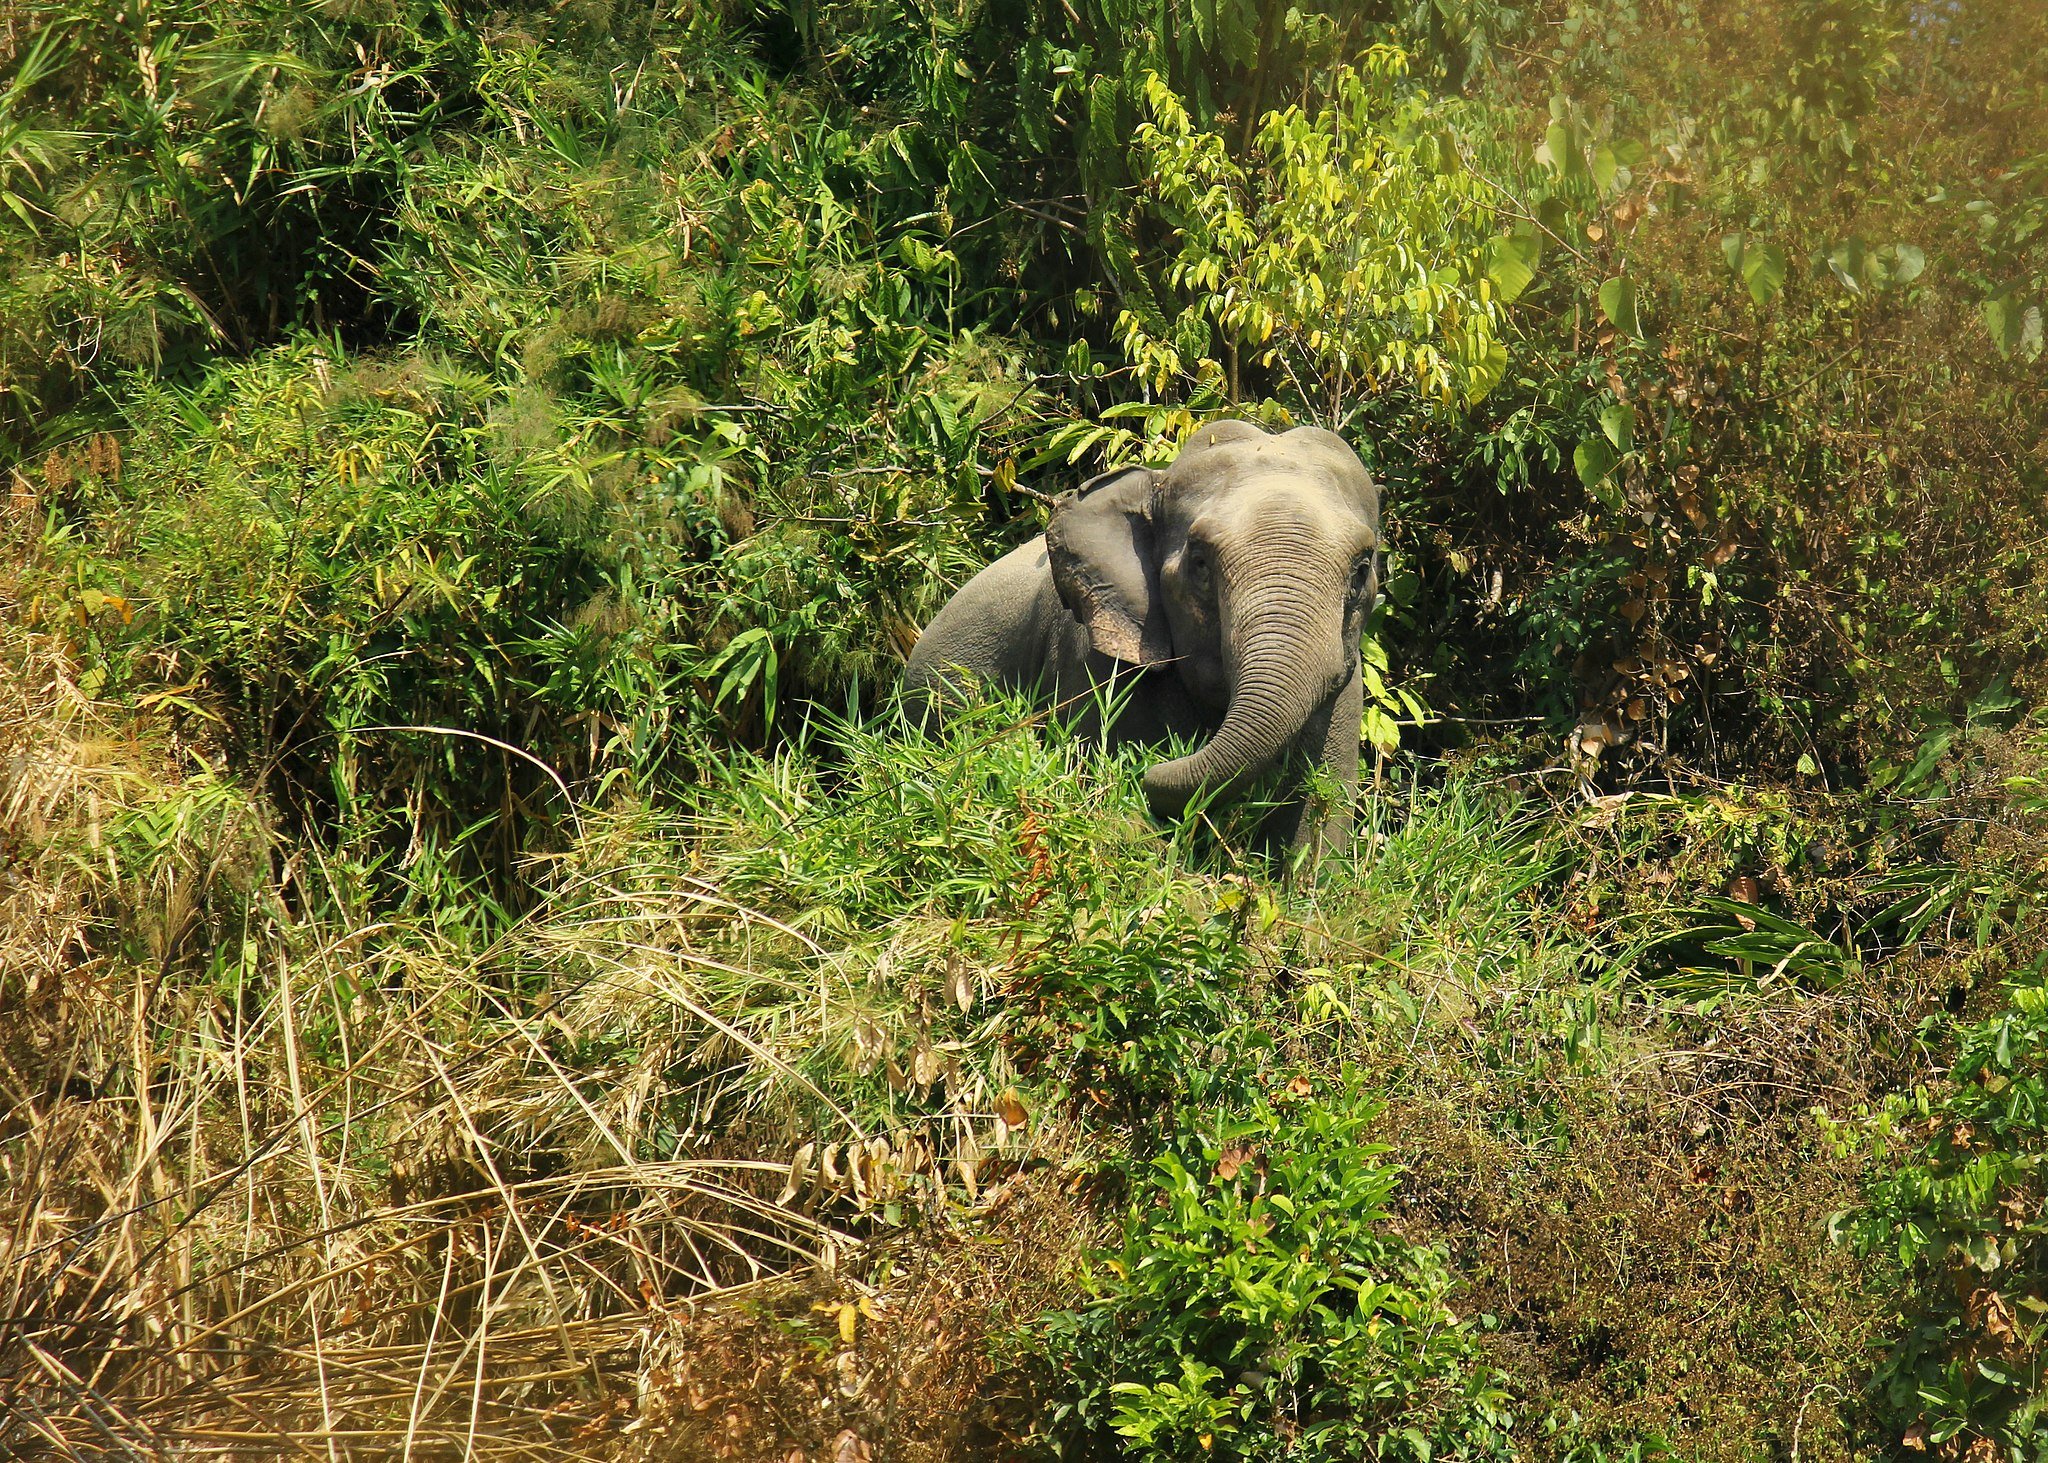 An Asian elephant in Cox's Bazar [Image by: Syedabbas321/commons.wikimedia CC BY-SA 4.0]